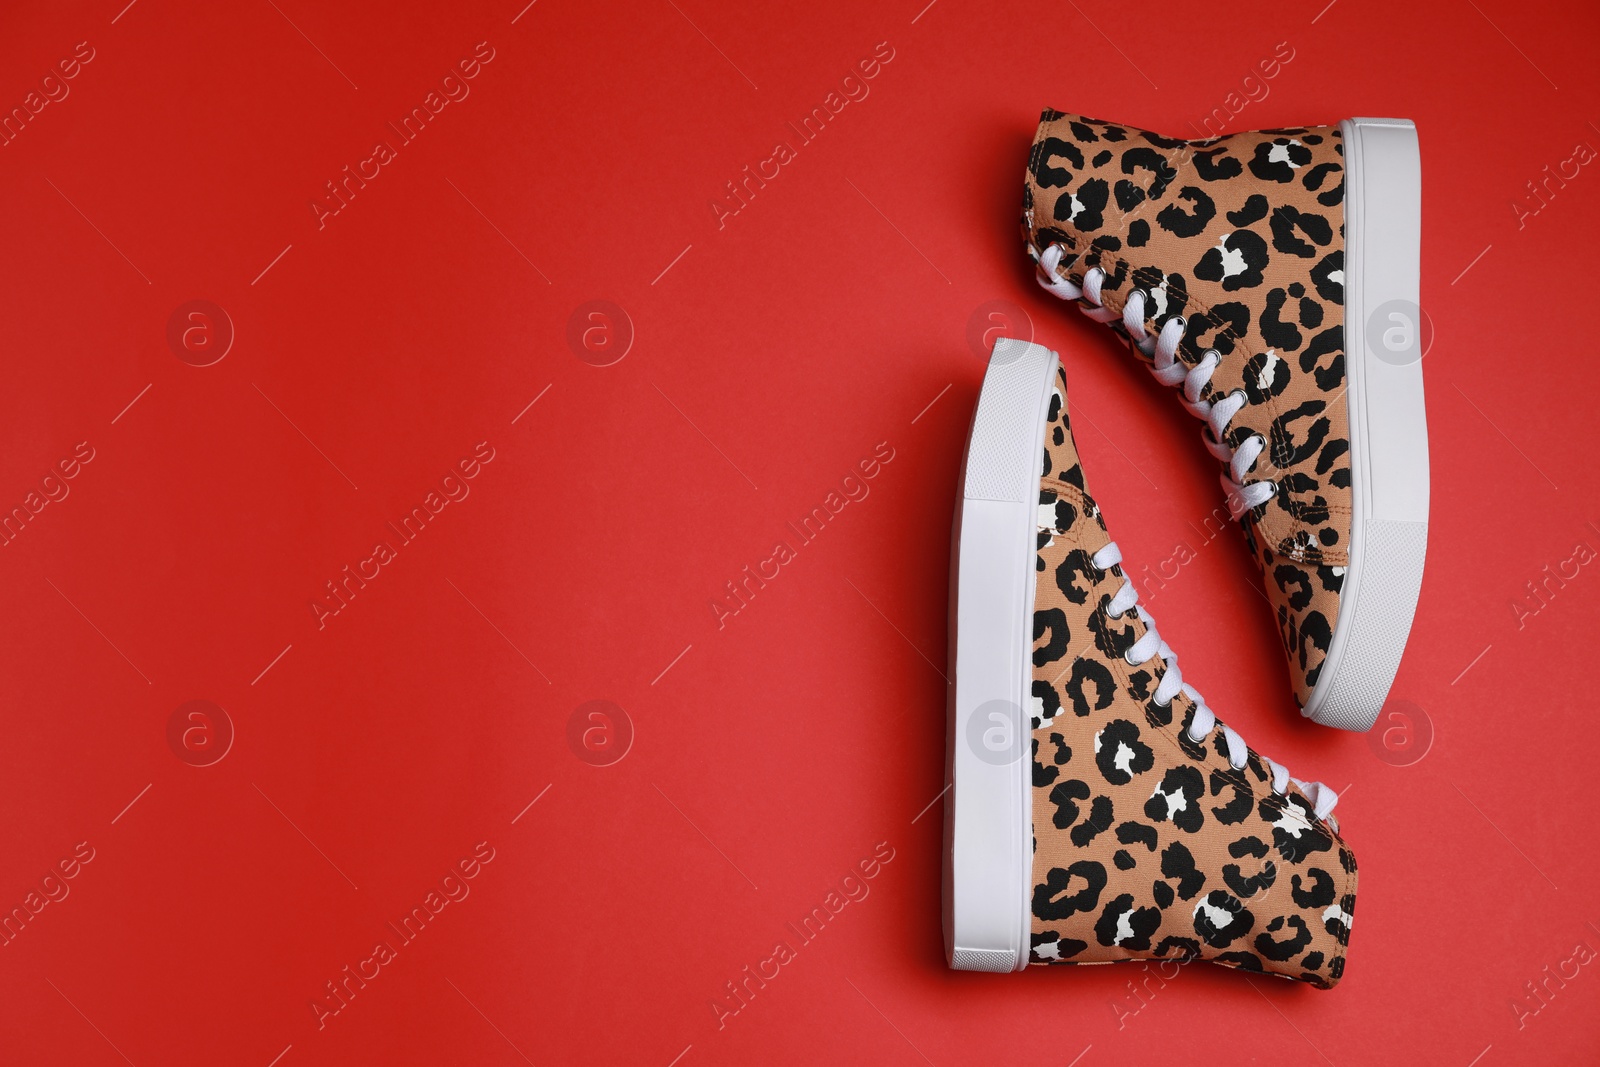 Photo of Pair of classic old school sneakers with leopard print on red background, flat lay. Space for text